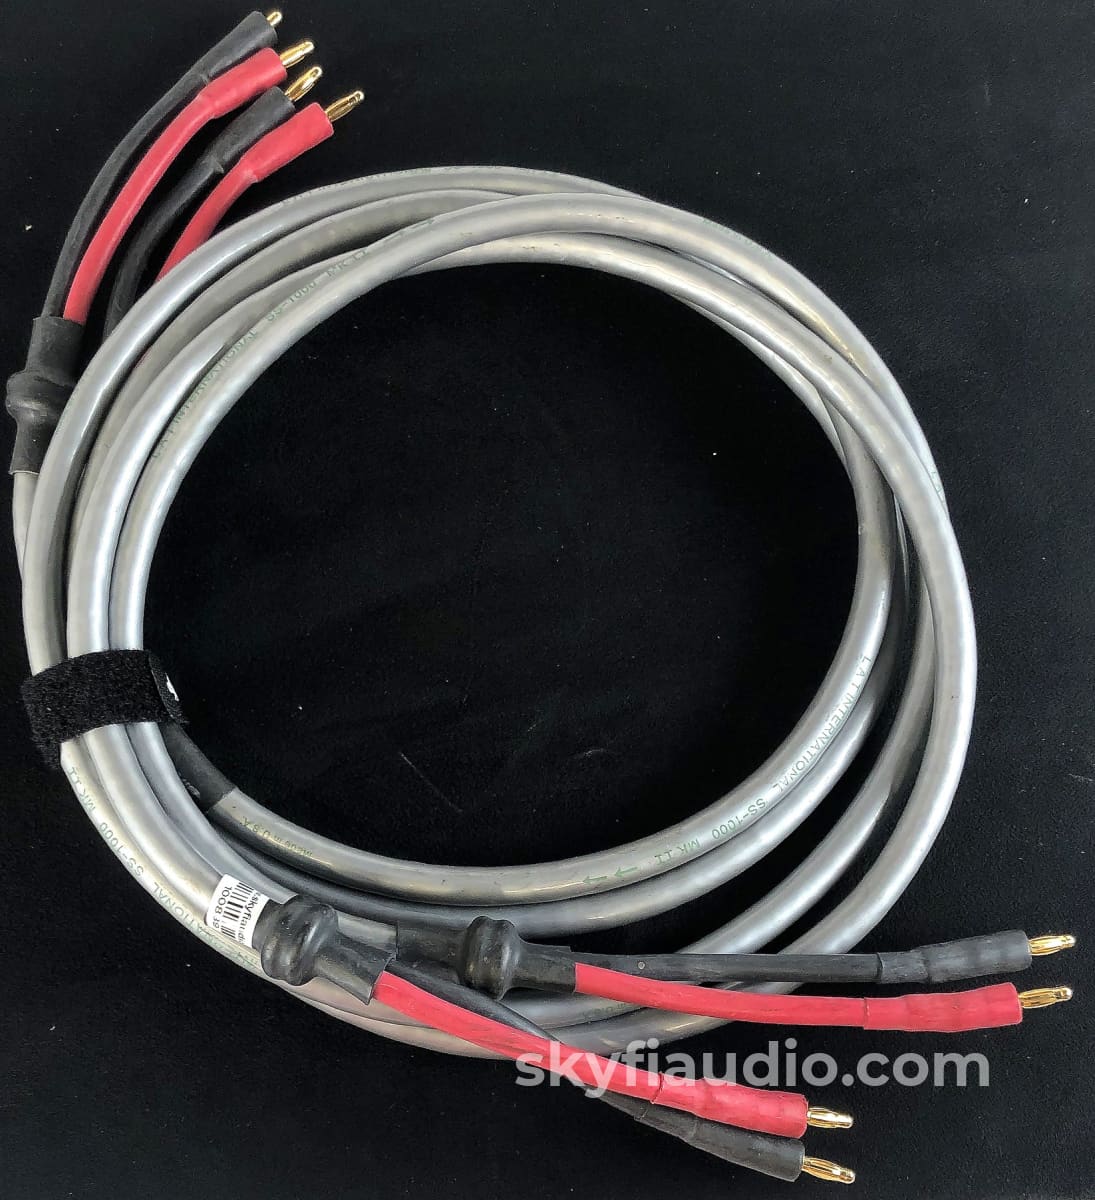 Lat International Ss 1000 Mk2 Speaker Cable Pair - 6 Cables